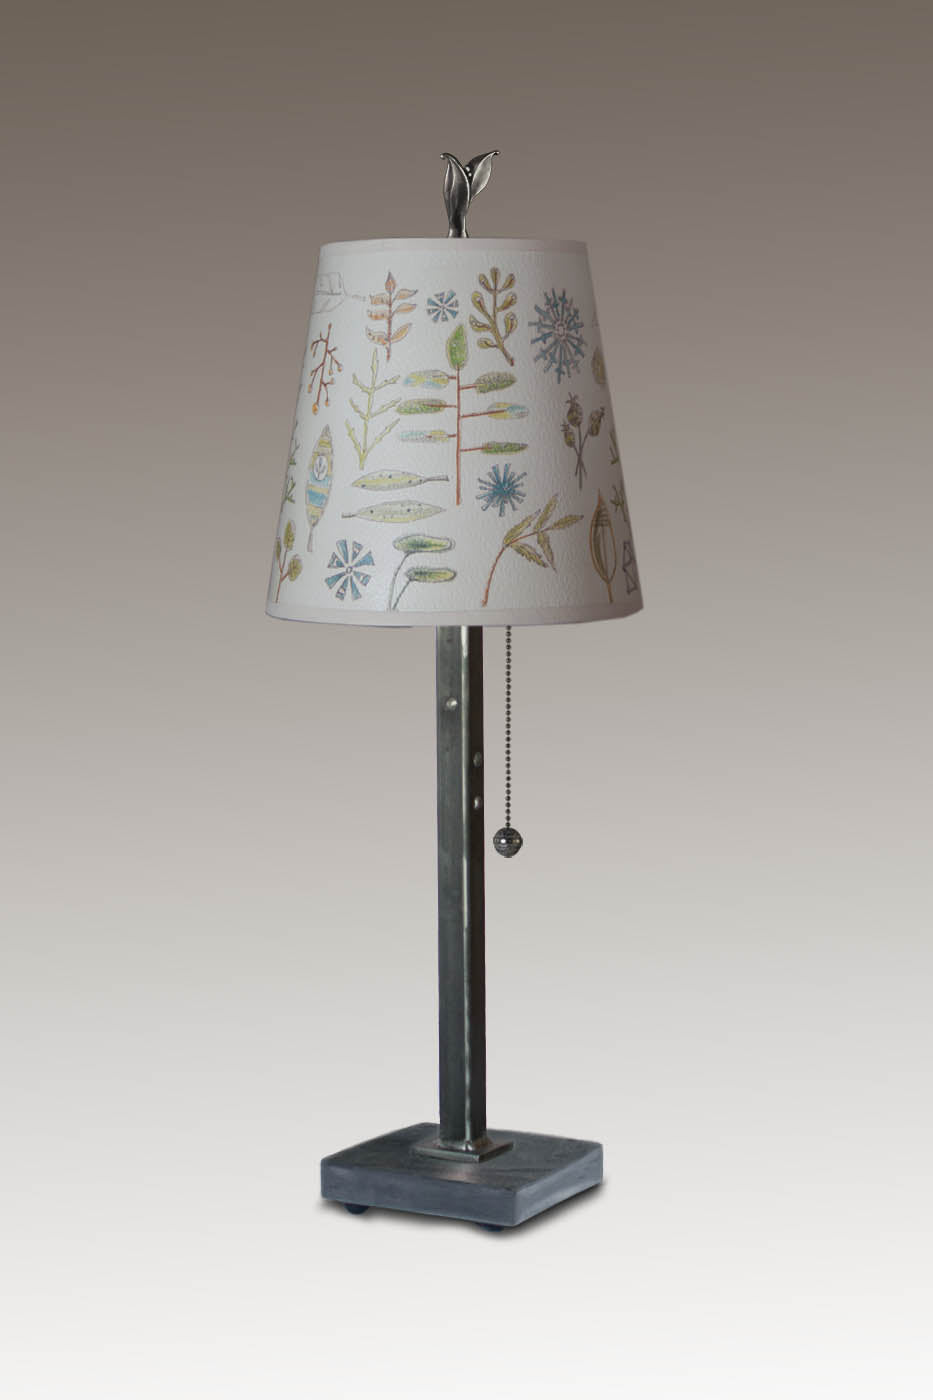 Janna Ugone & Co Table Lamp Steel Table Lamp with Small Drum Shade in Field Chart